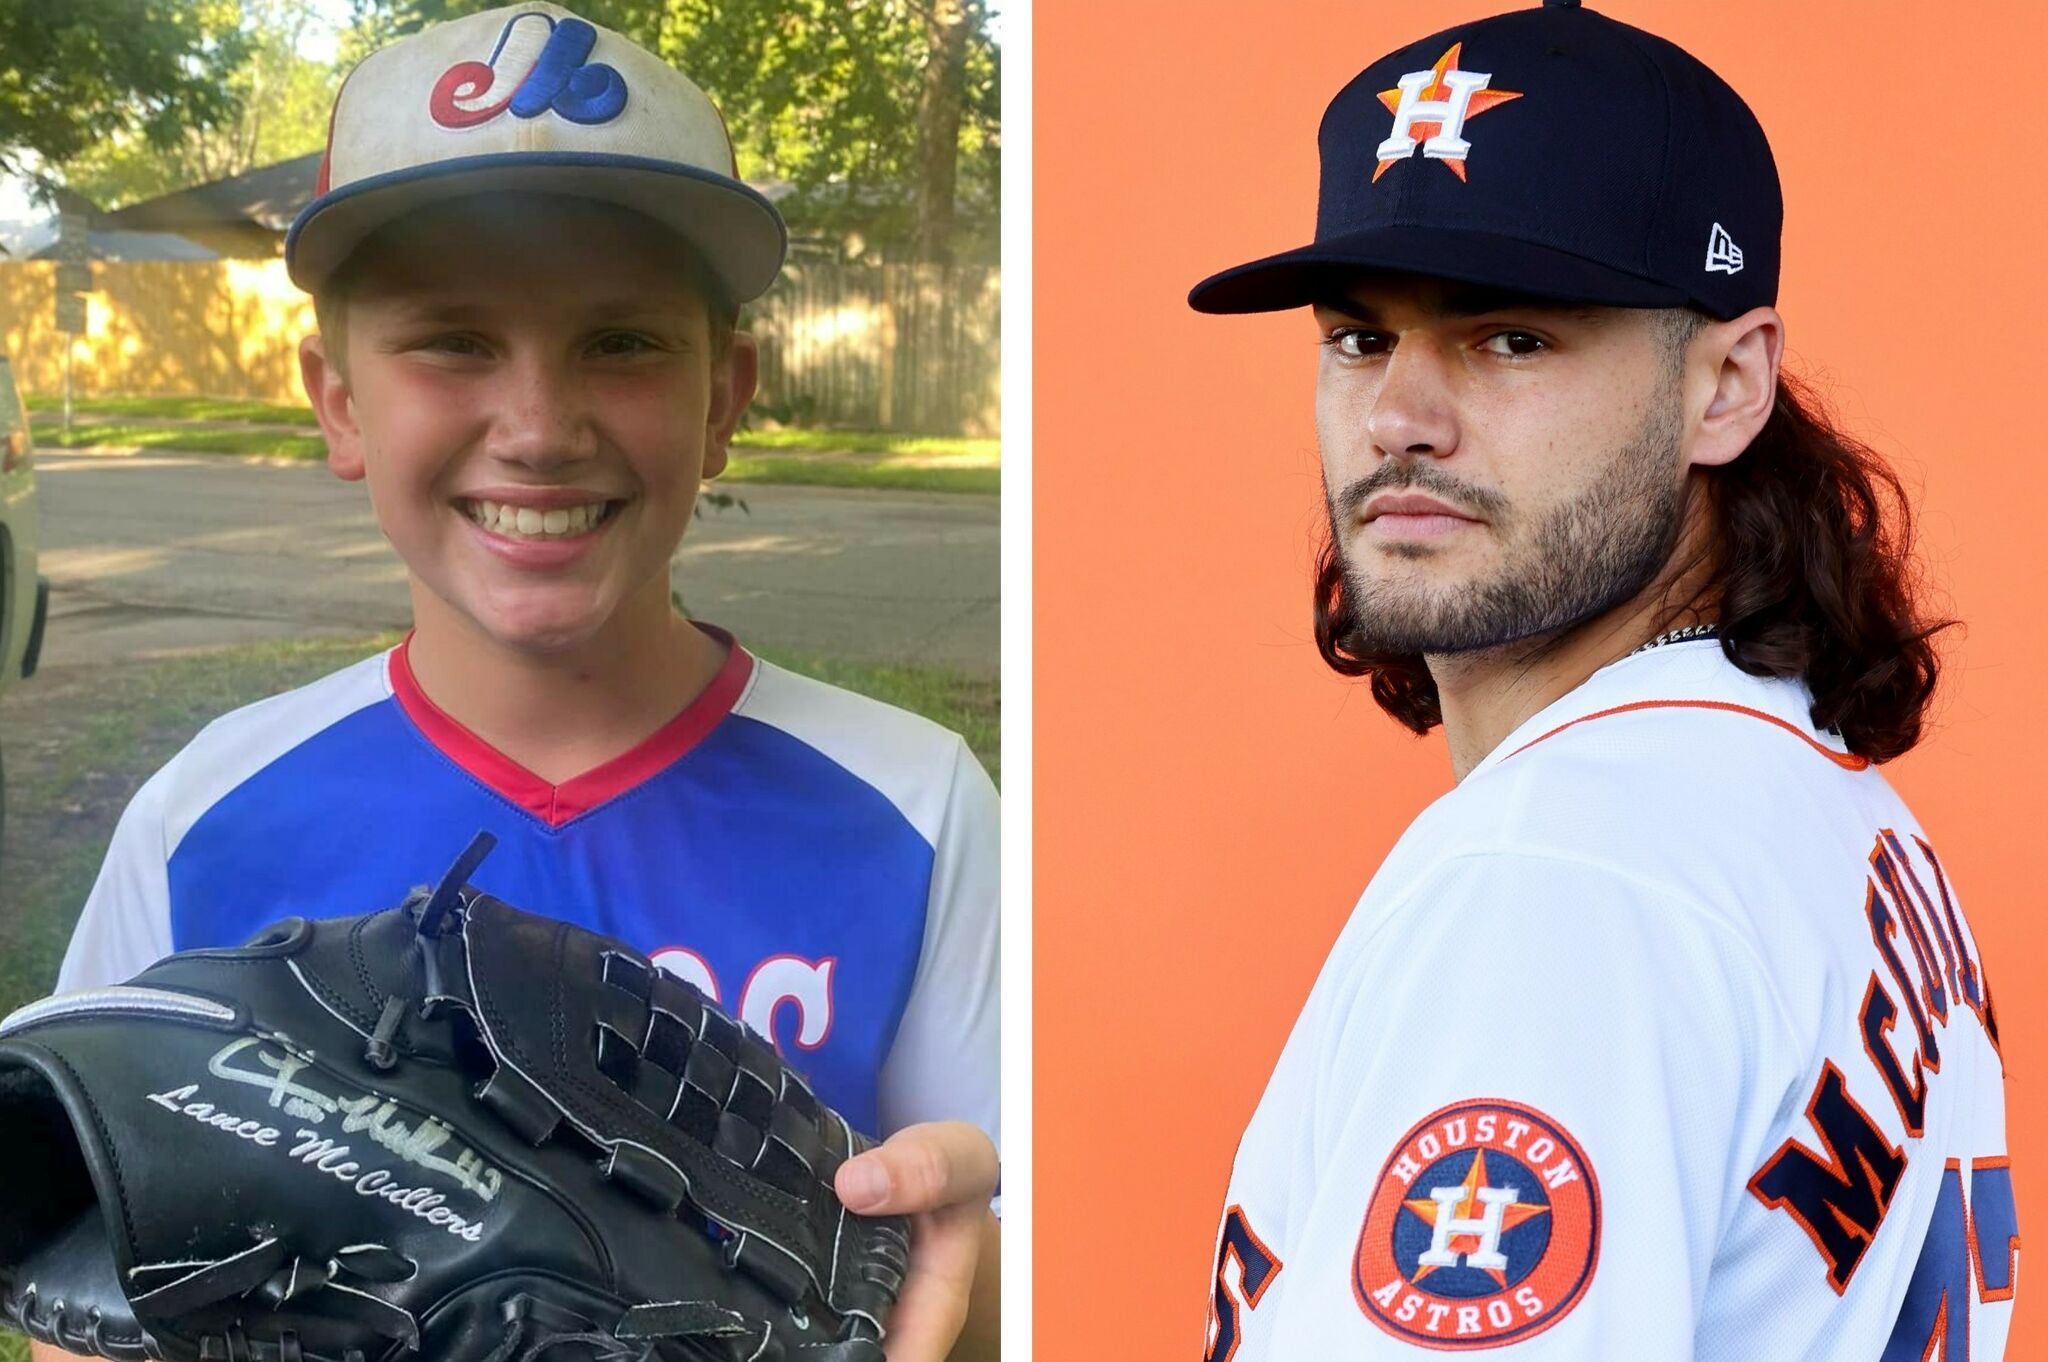 MLB Network - Lance McCullers Jr. is set to make his 2022